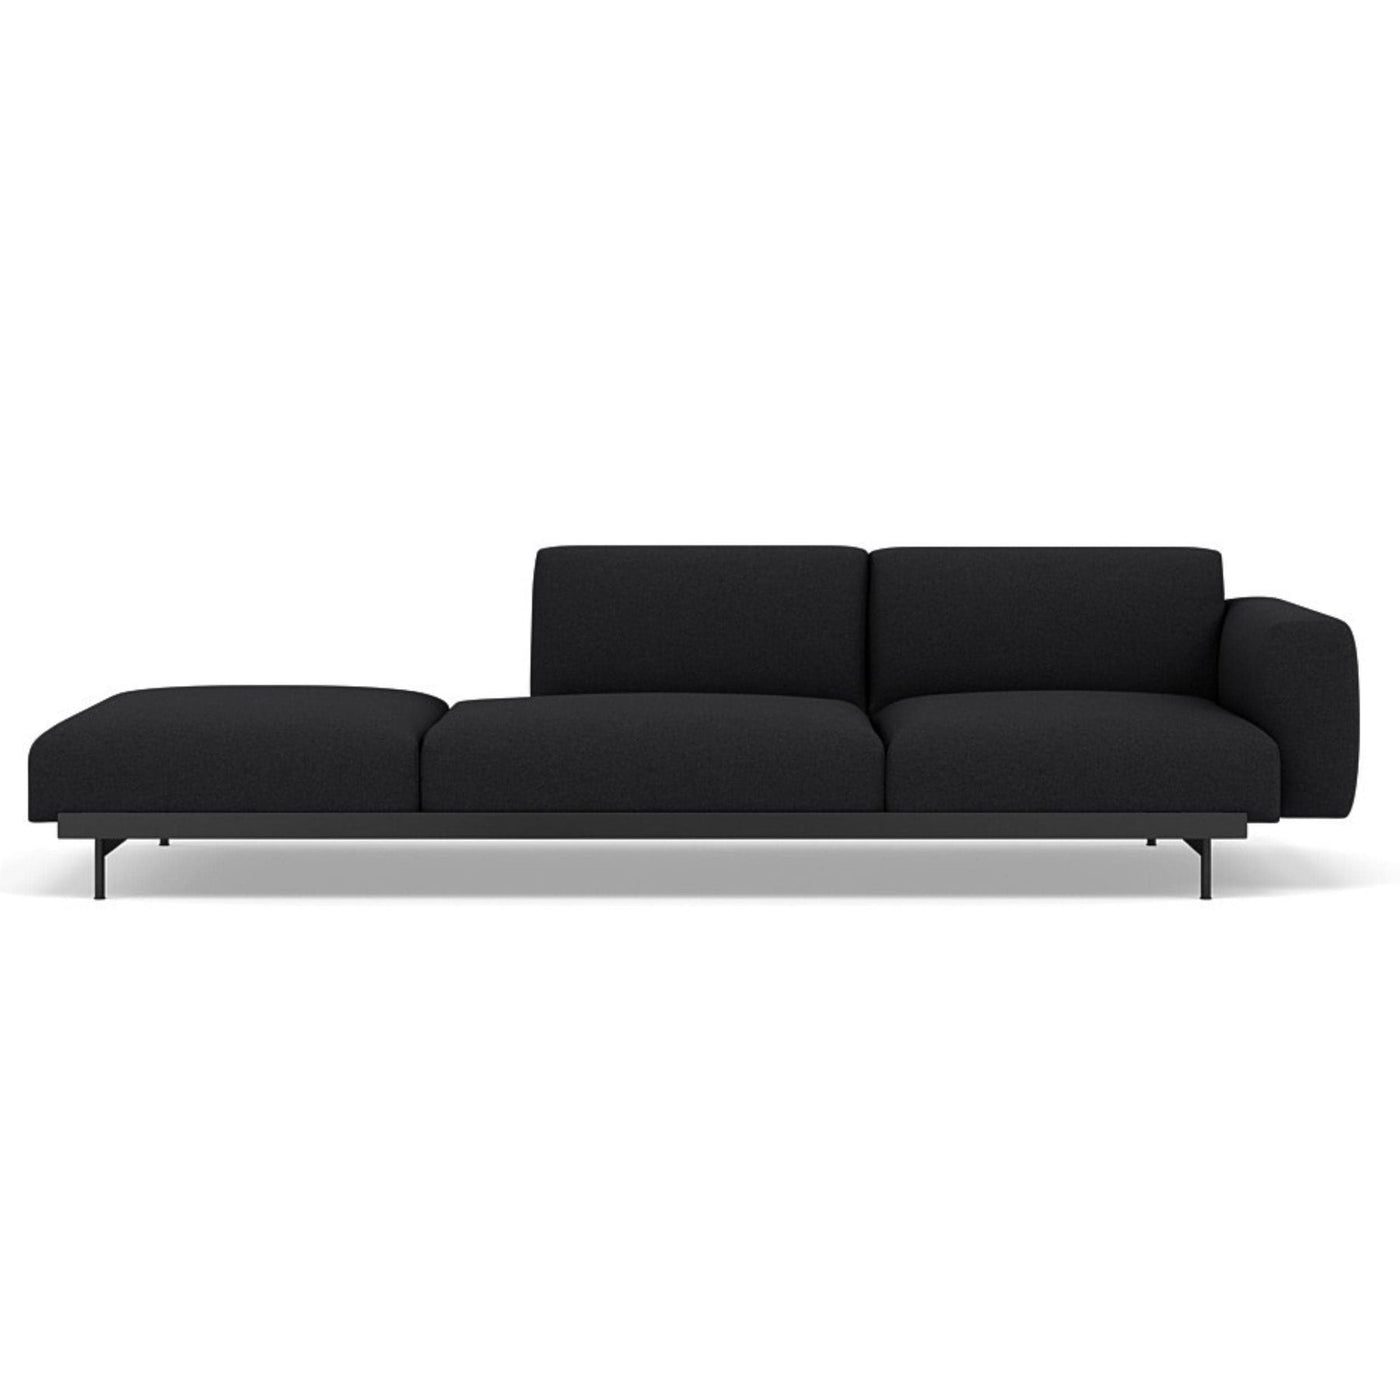 Muuto In Situ Modular 3 Seater Sofa, configuration 4. Made to order from someday designs. #colour_divina-md-193